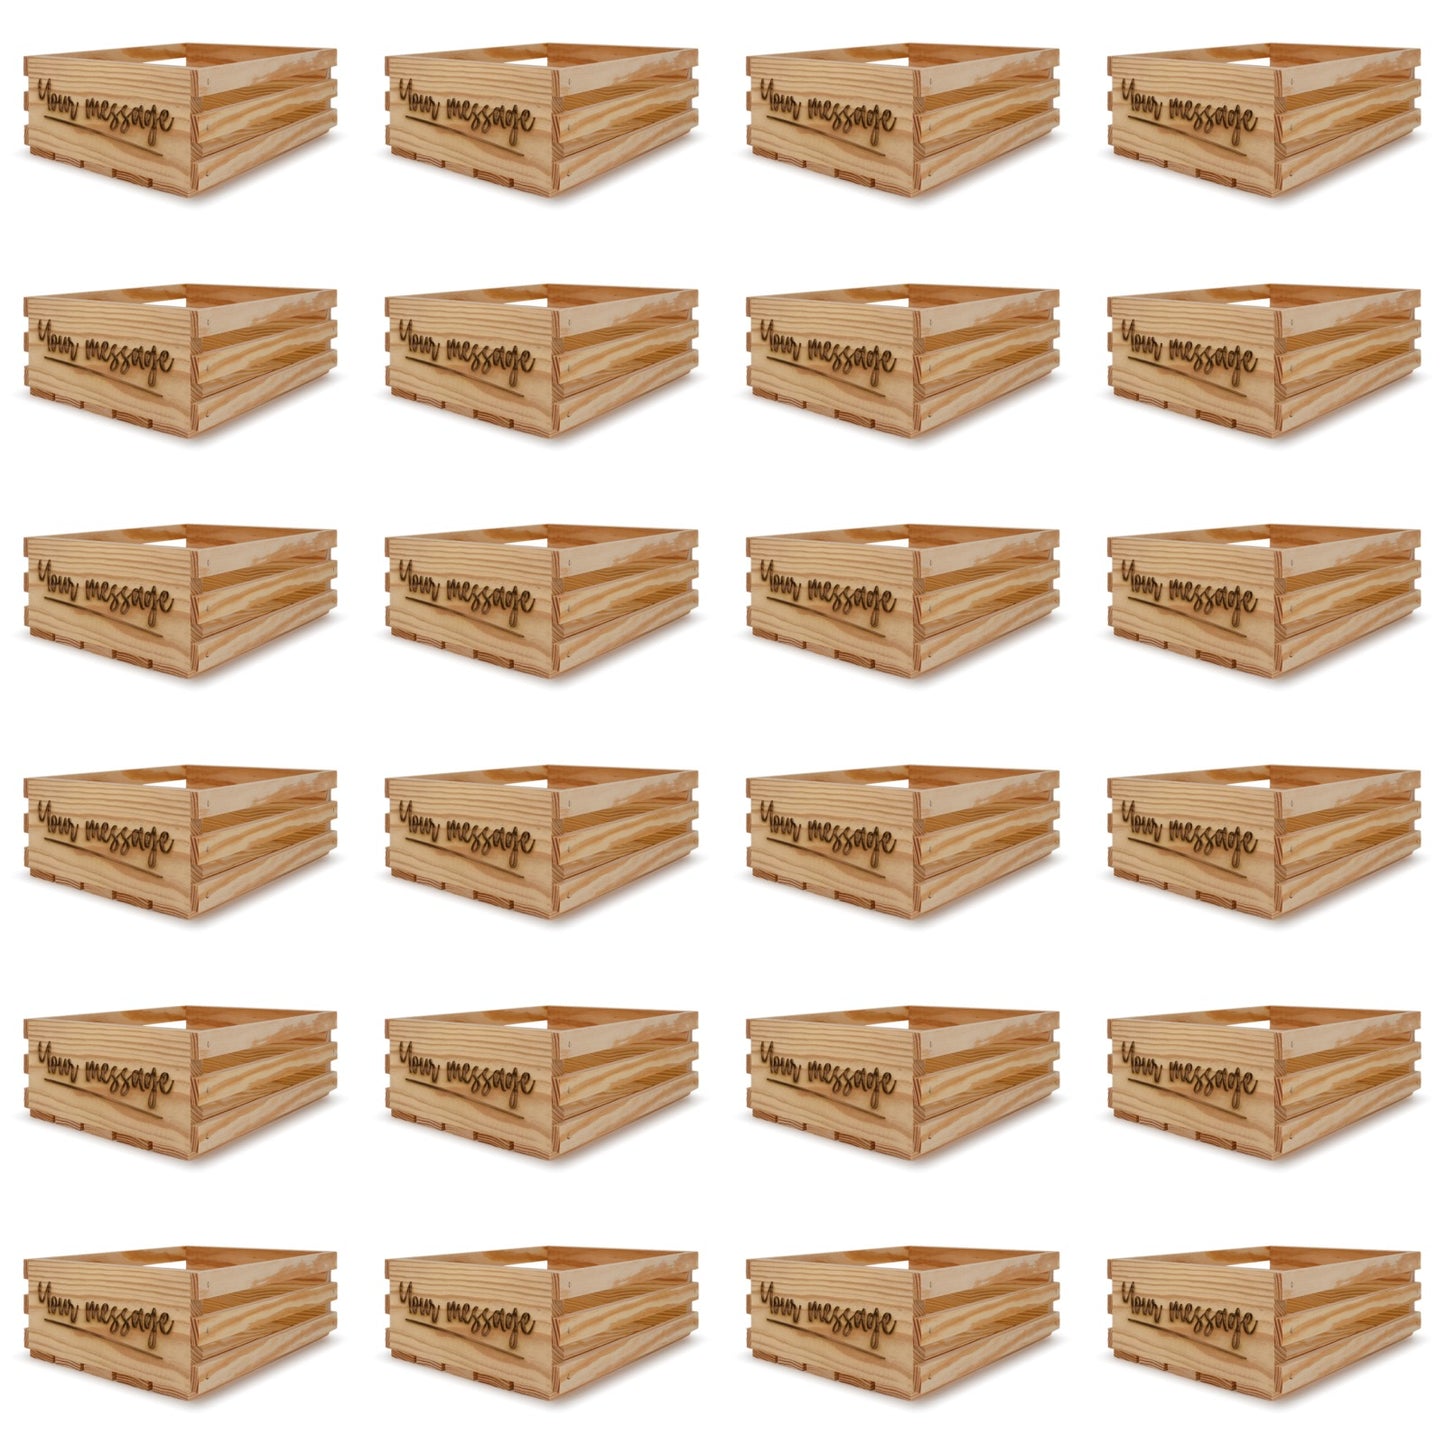 24 Small wooden crates 12x10x4.5 your message included